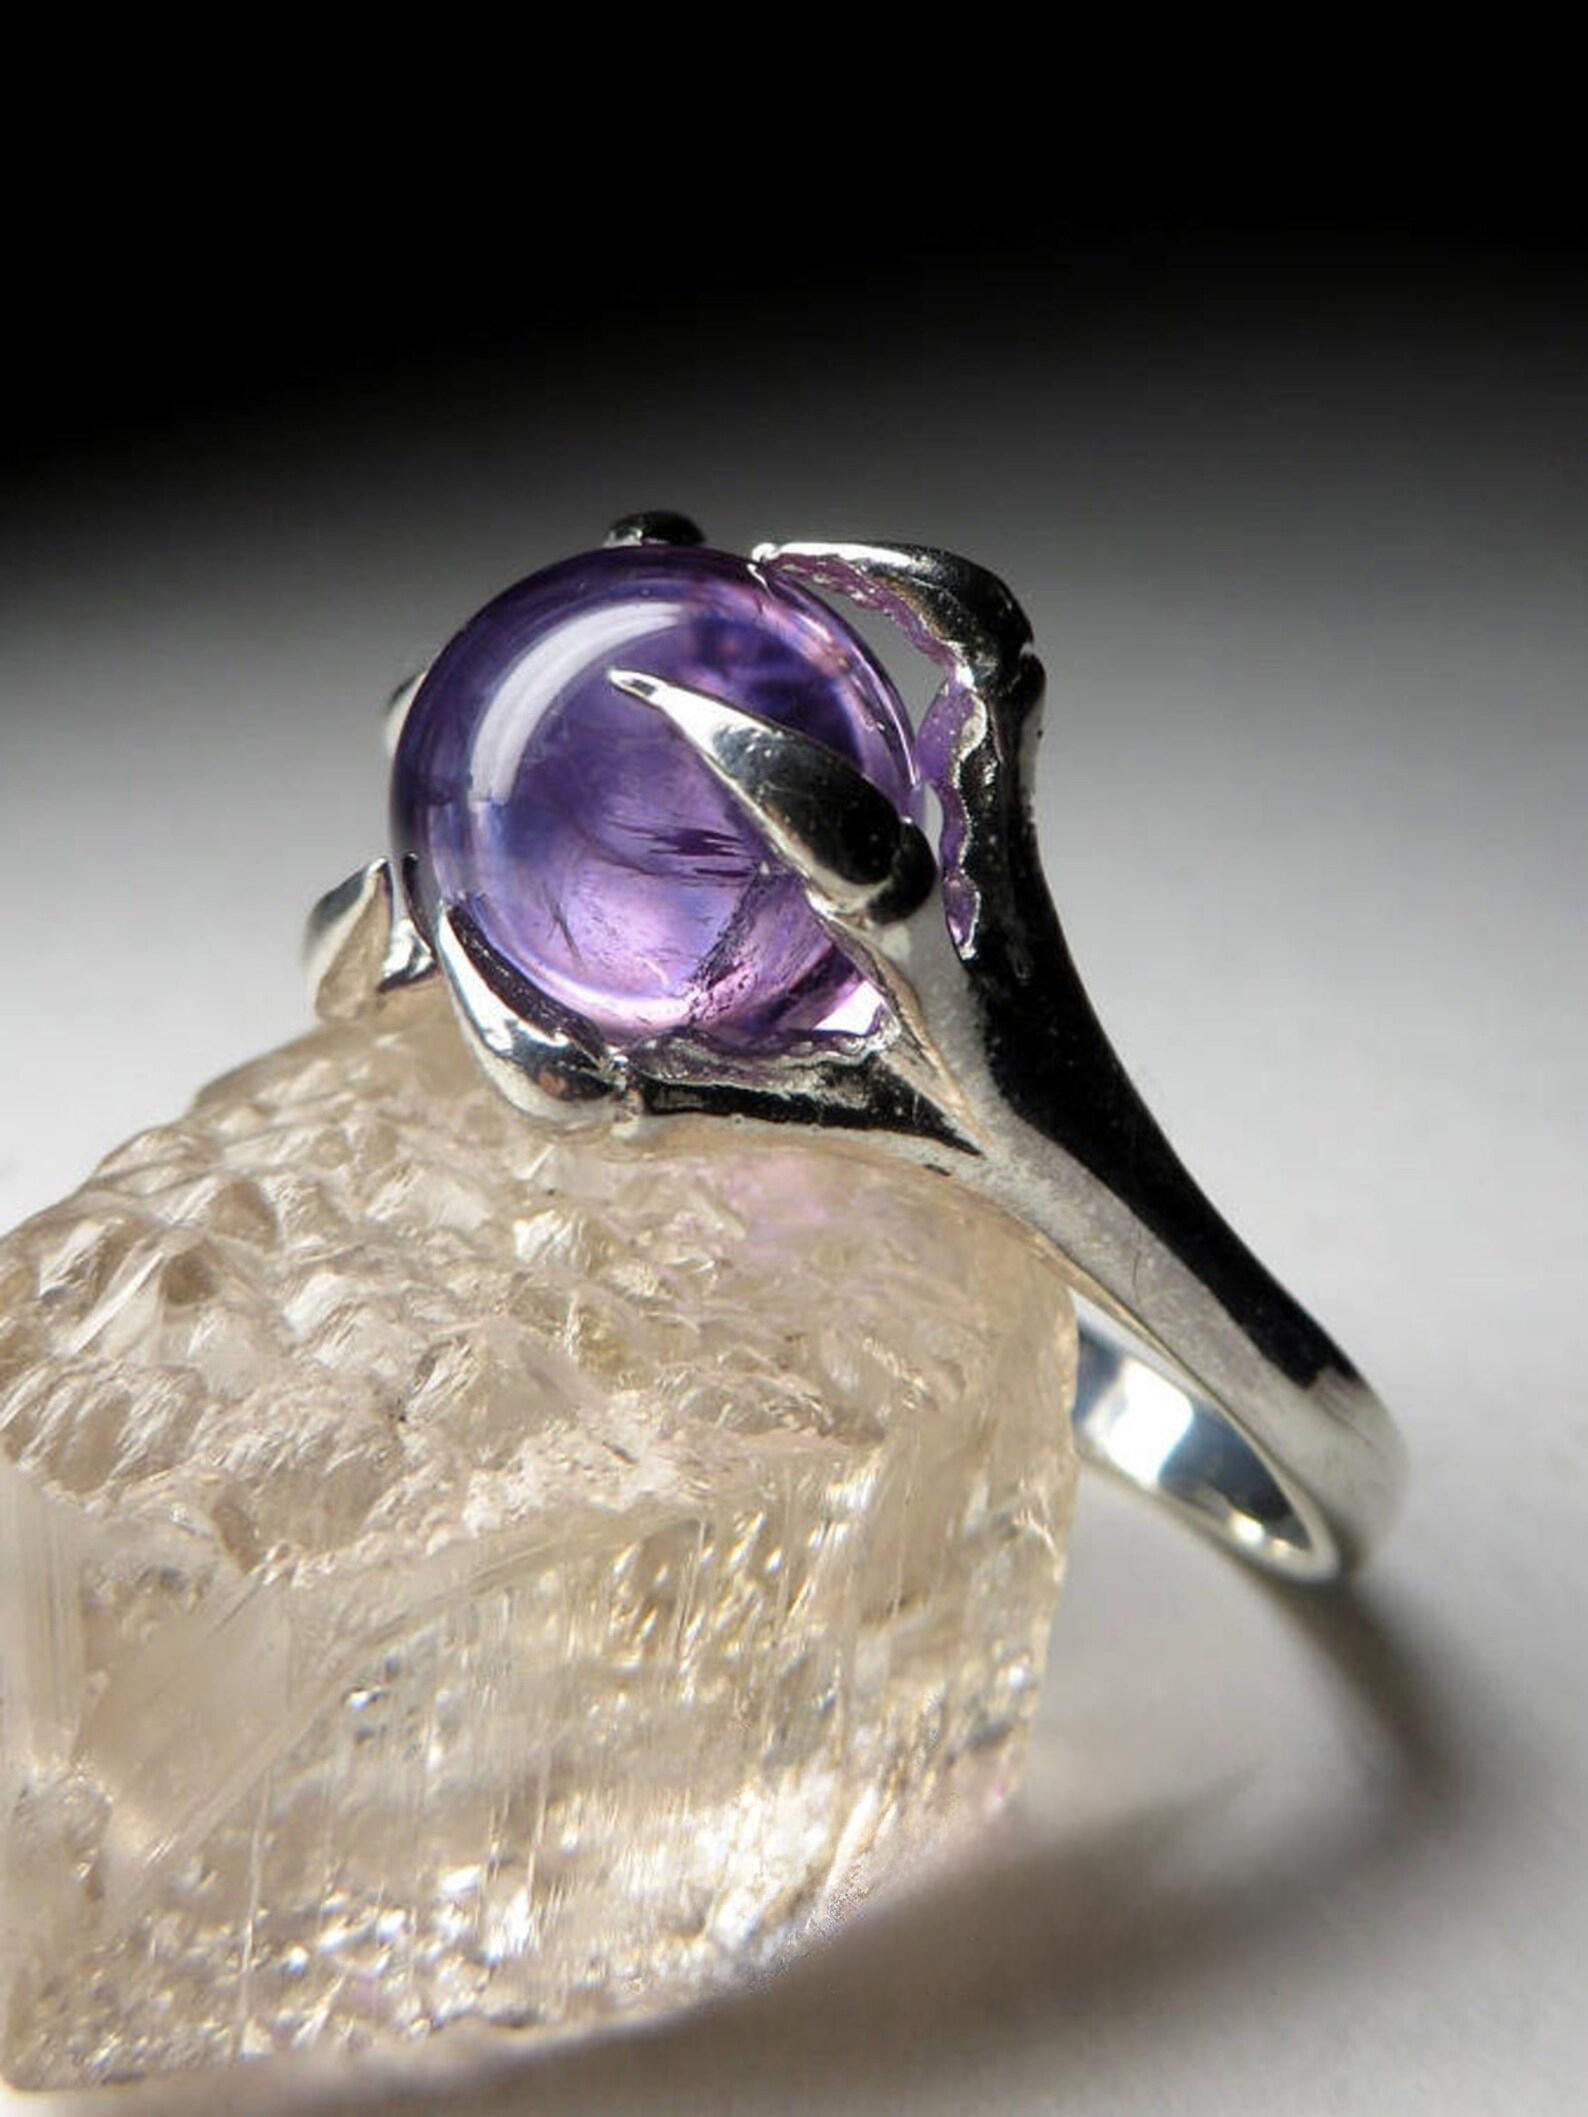 Silver rhodium plated ring with natural Amethyst sphere 
gemstone origin - Brazil
sphere diameter - 0.43 in / 11 mm
ring weight - 6.03 grams
ring size - 6 US